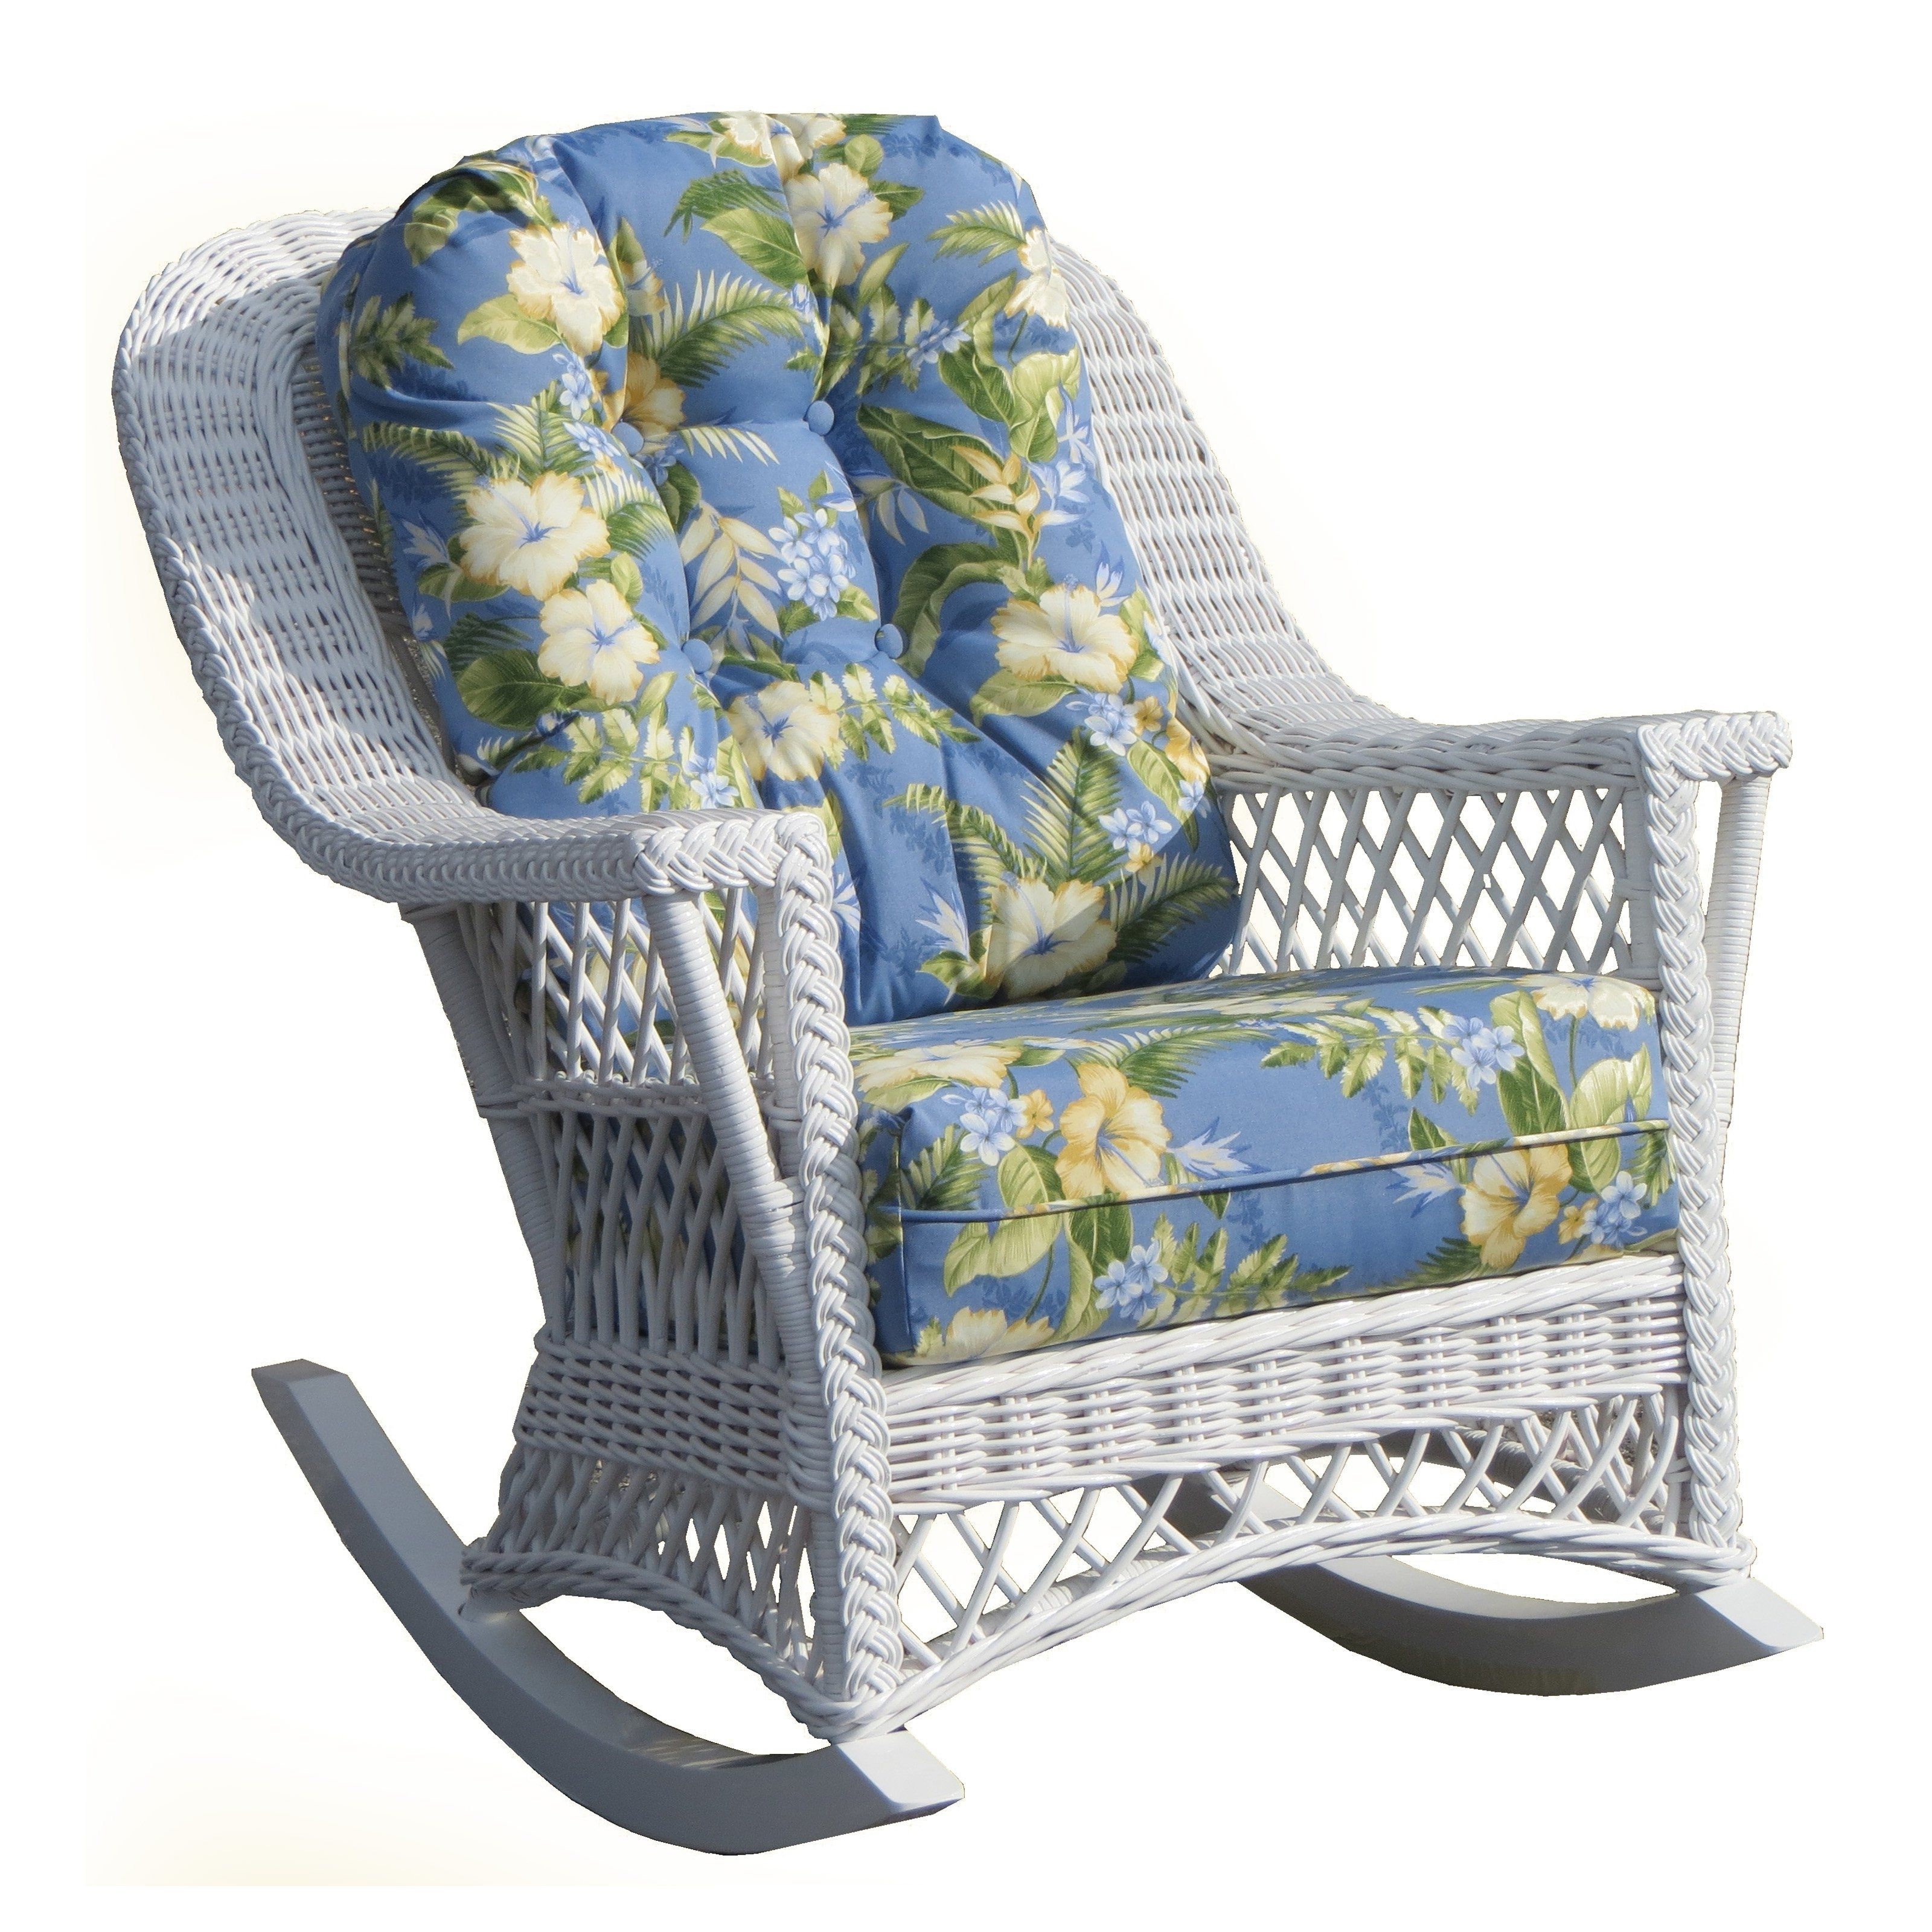 Hayneedle Pertaining To Wicker Rocking Chairs With Cushions (View 6 of 15)